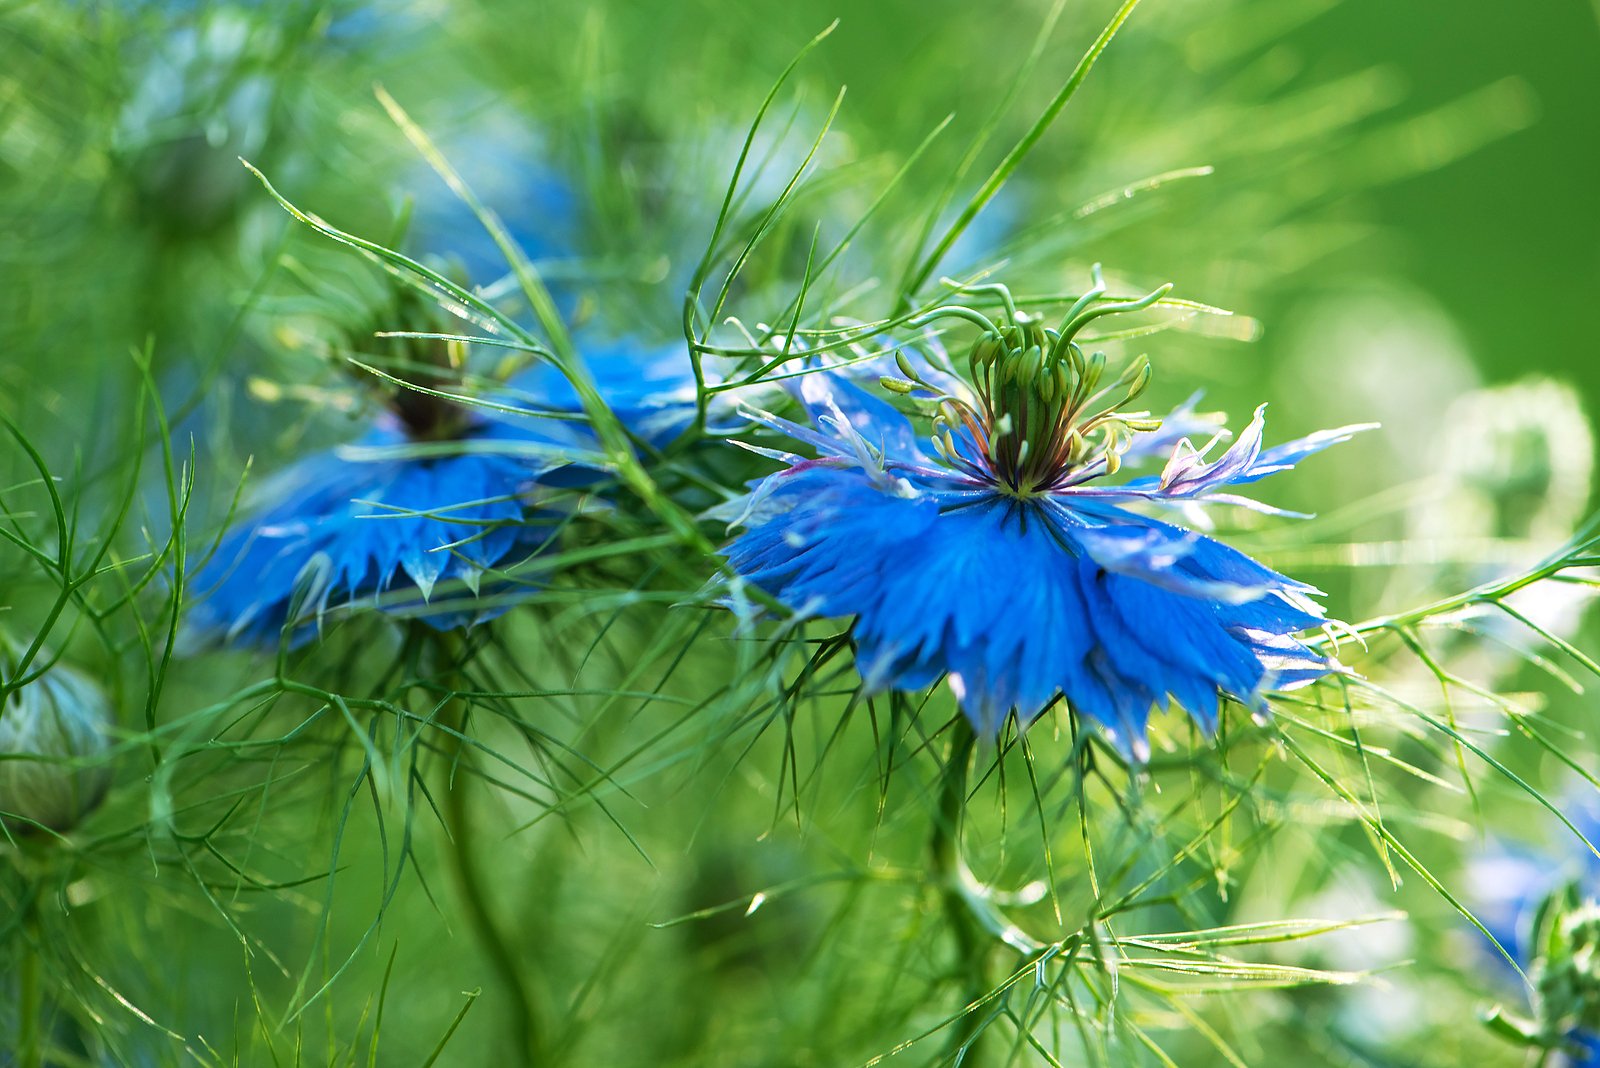 How to Grow Nigella - Love-In-A-Mist